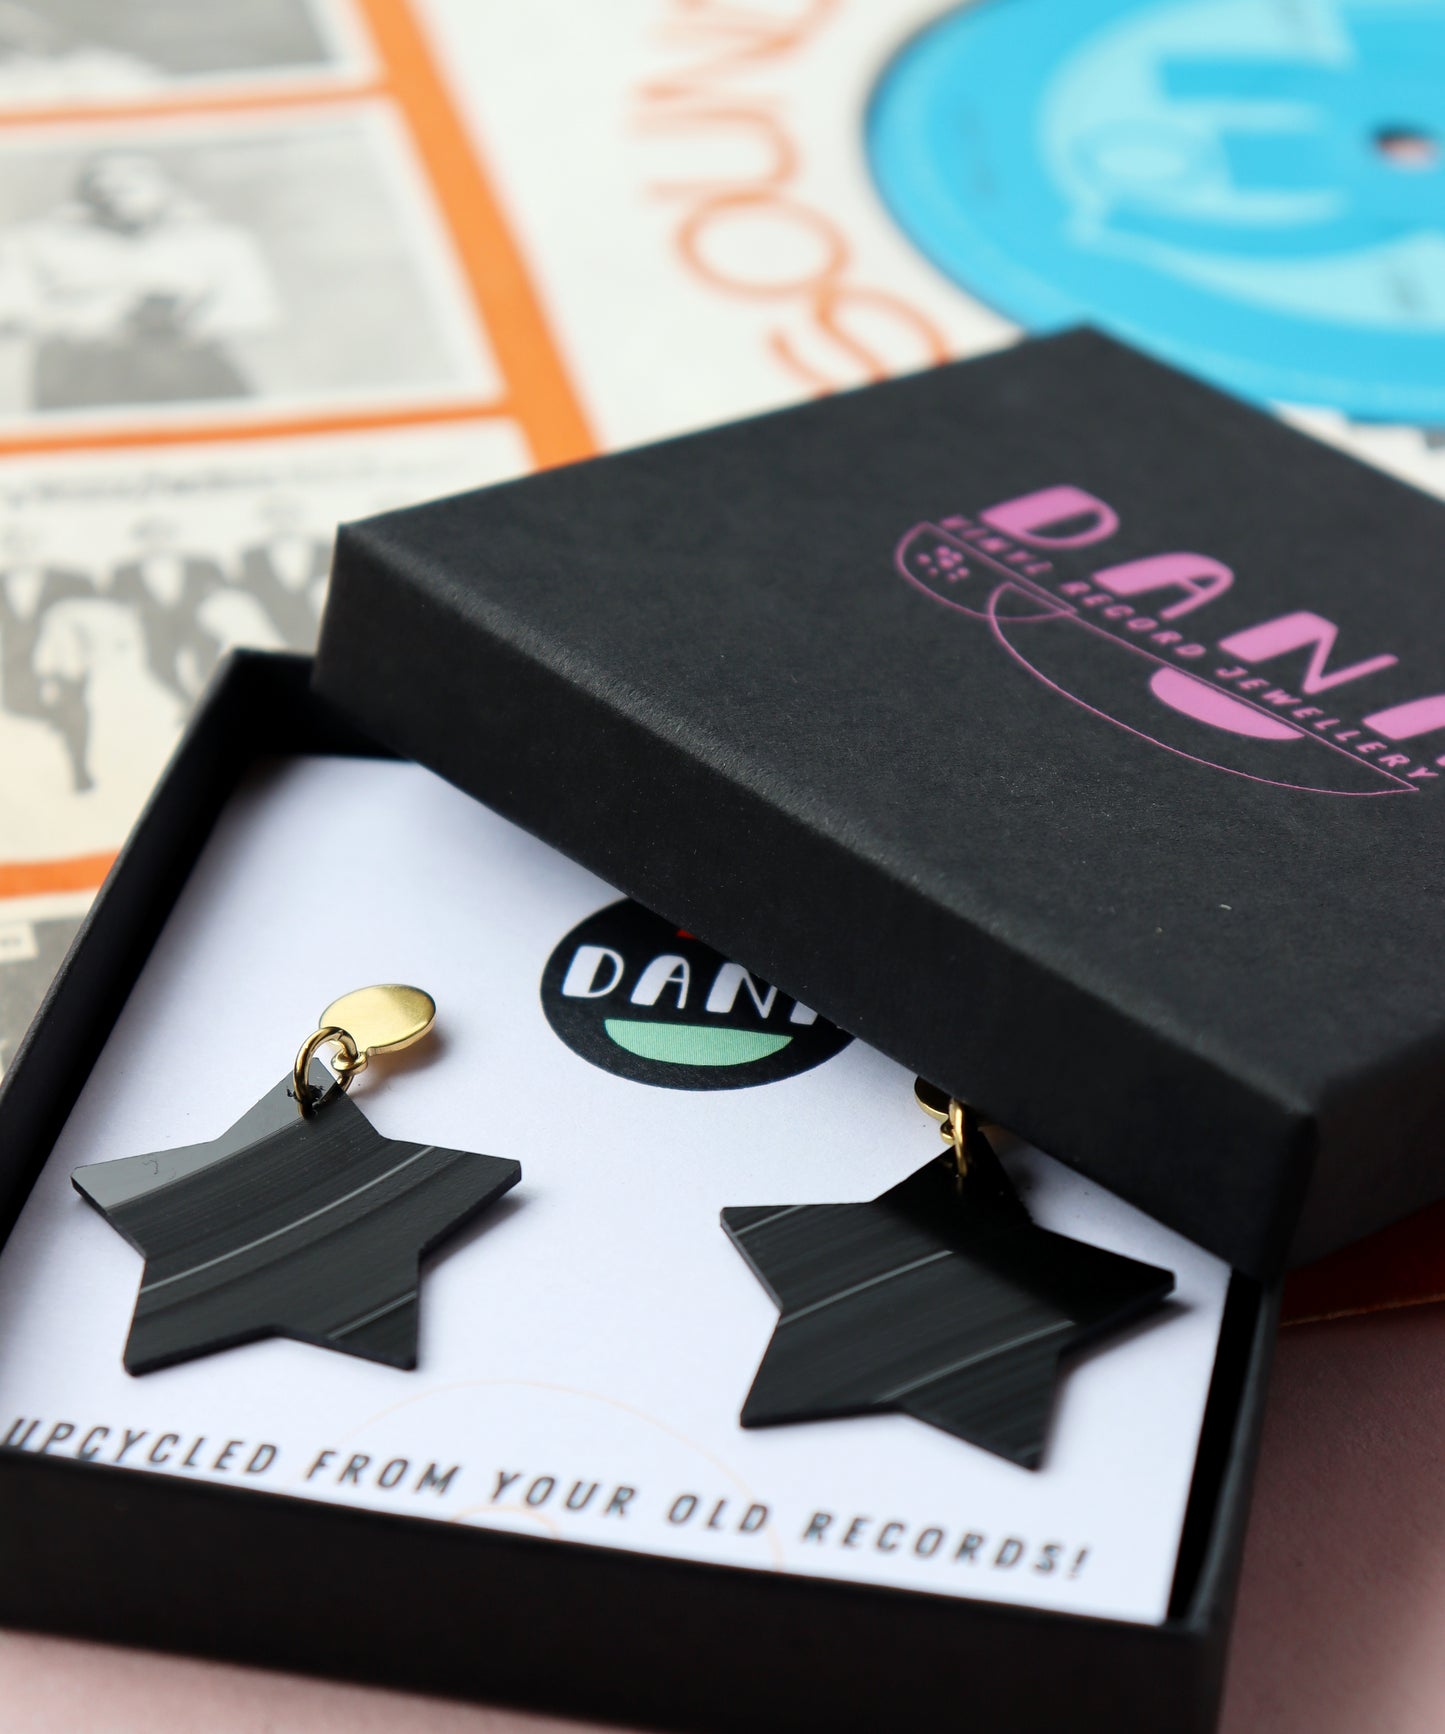 Upcycled black vinyl record star earrings - gold or silver posts